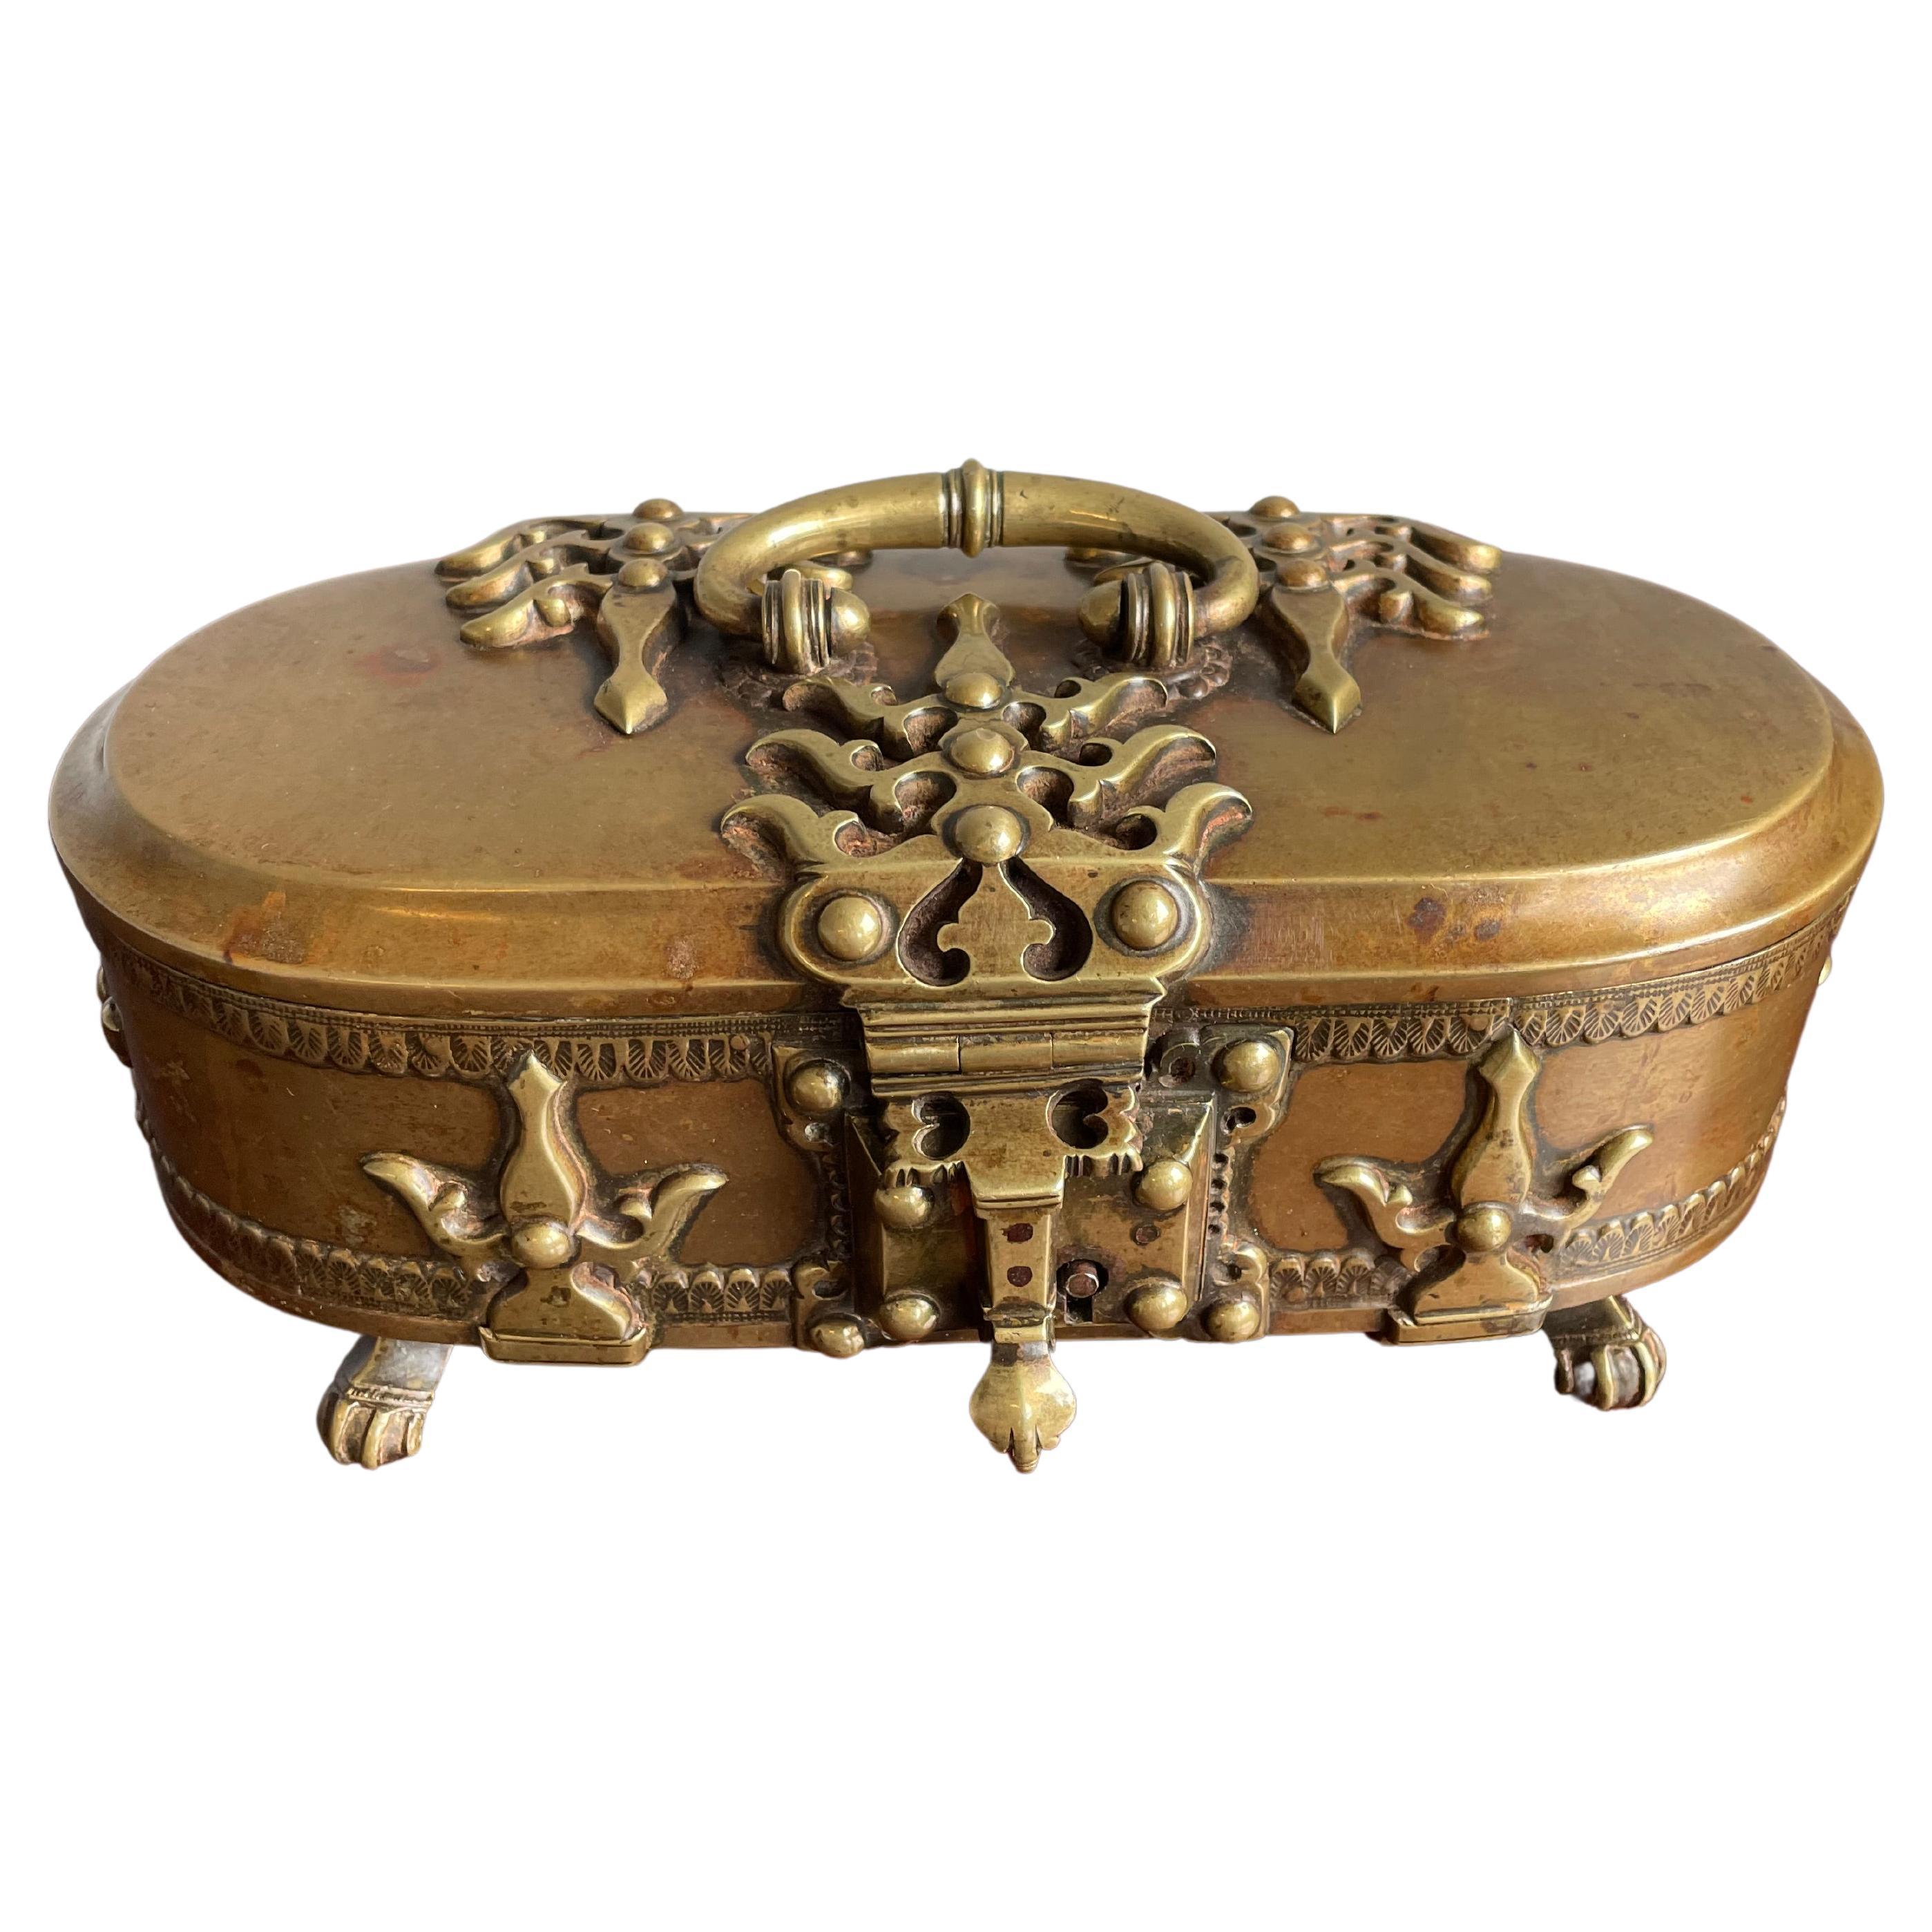 Unique & Stunning 1800s Bronze & Brass Betel Nut Box Museum Quality & Condition For Sale